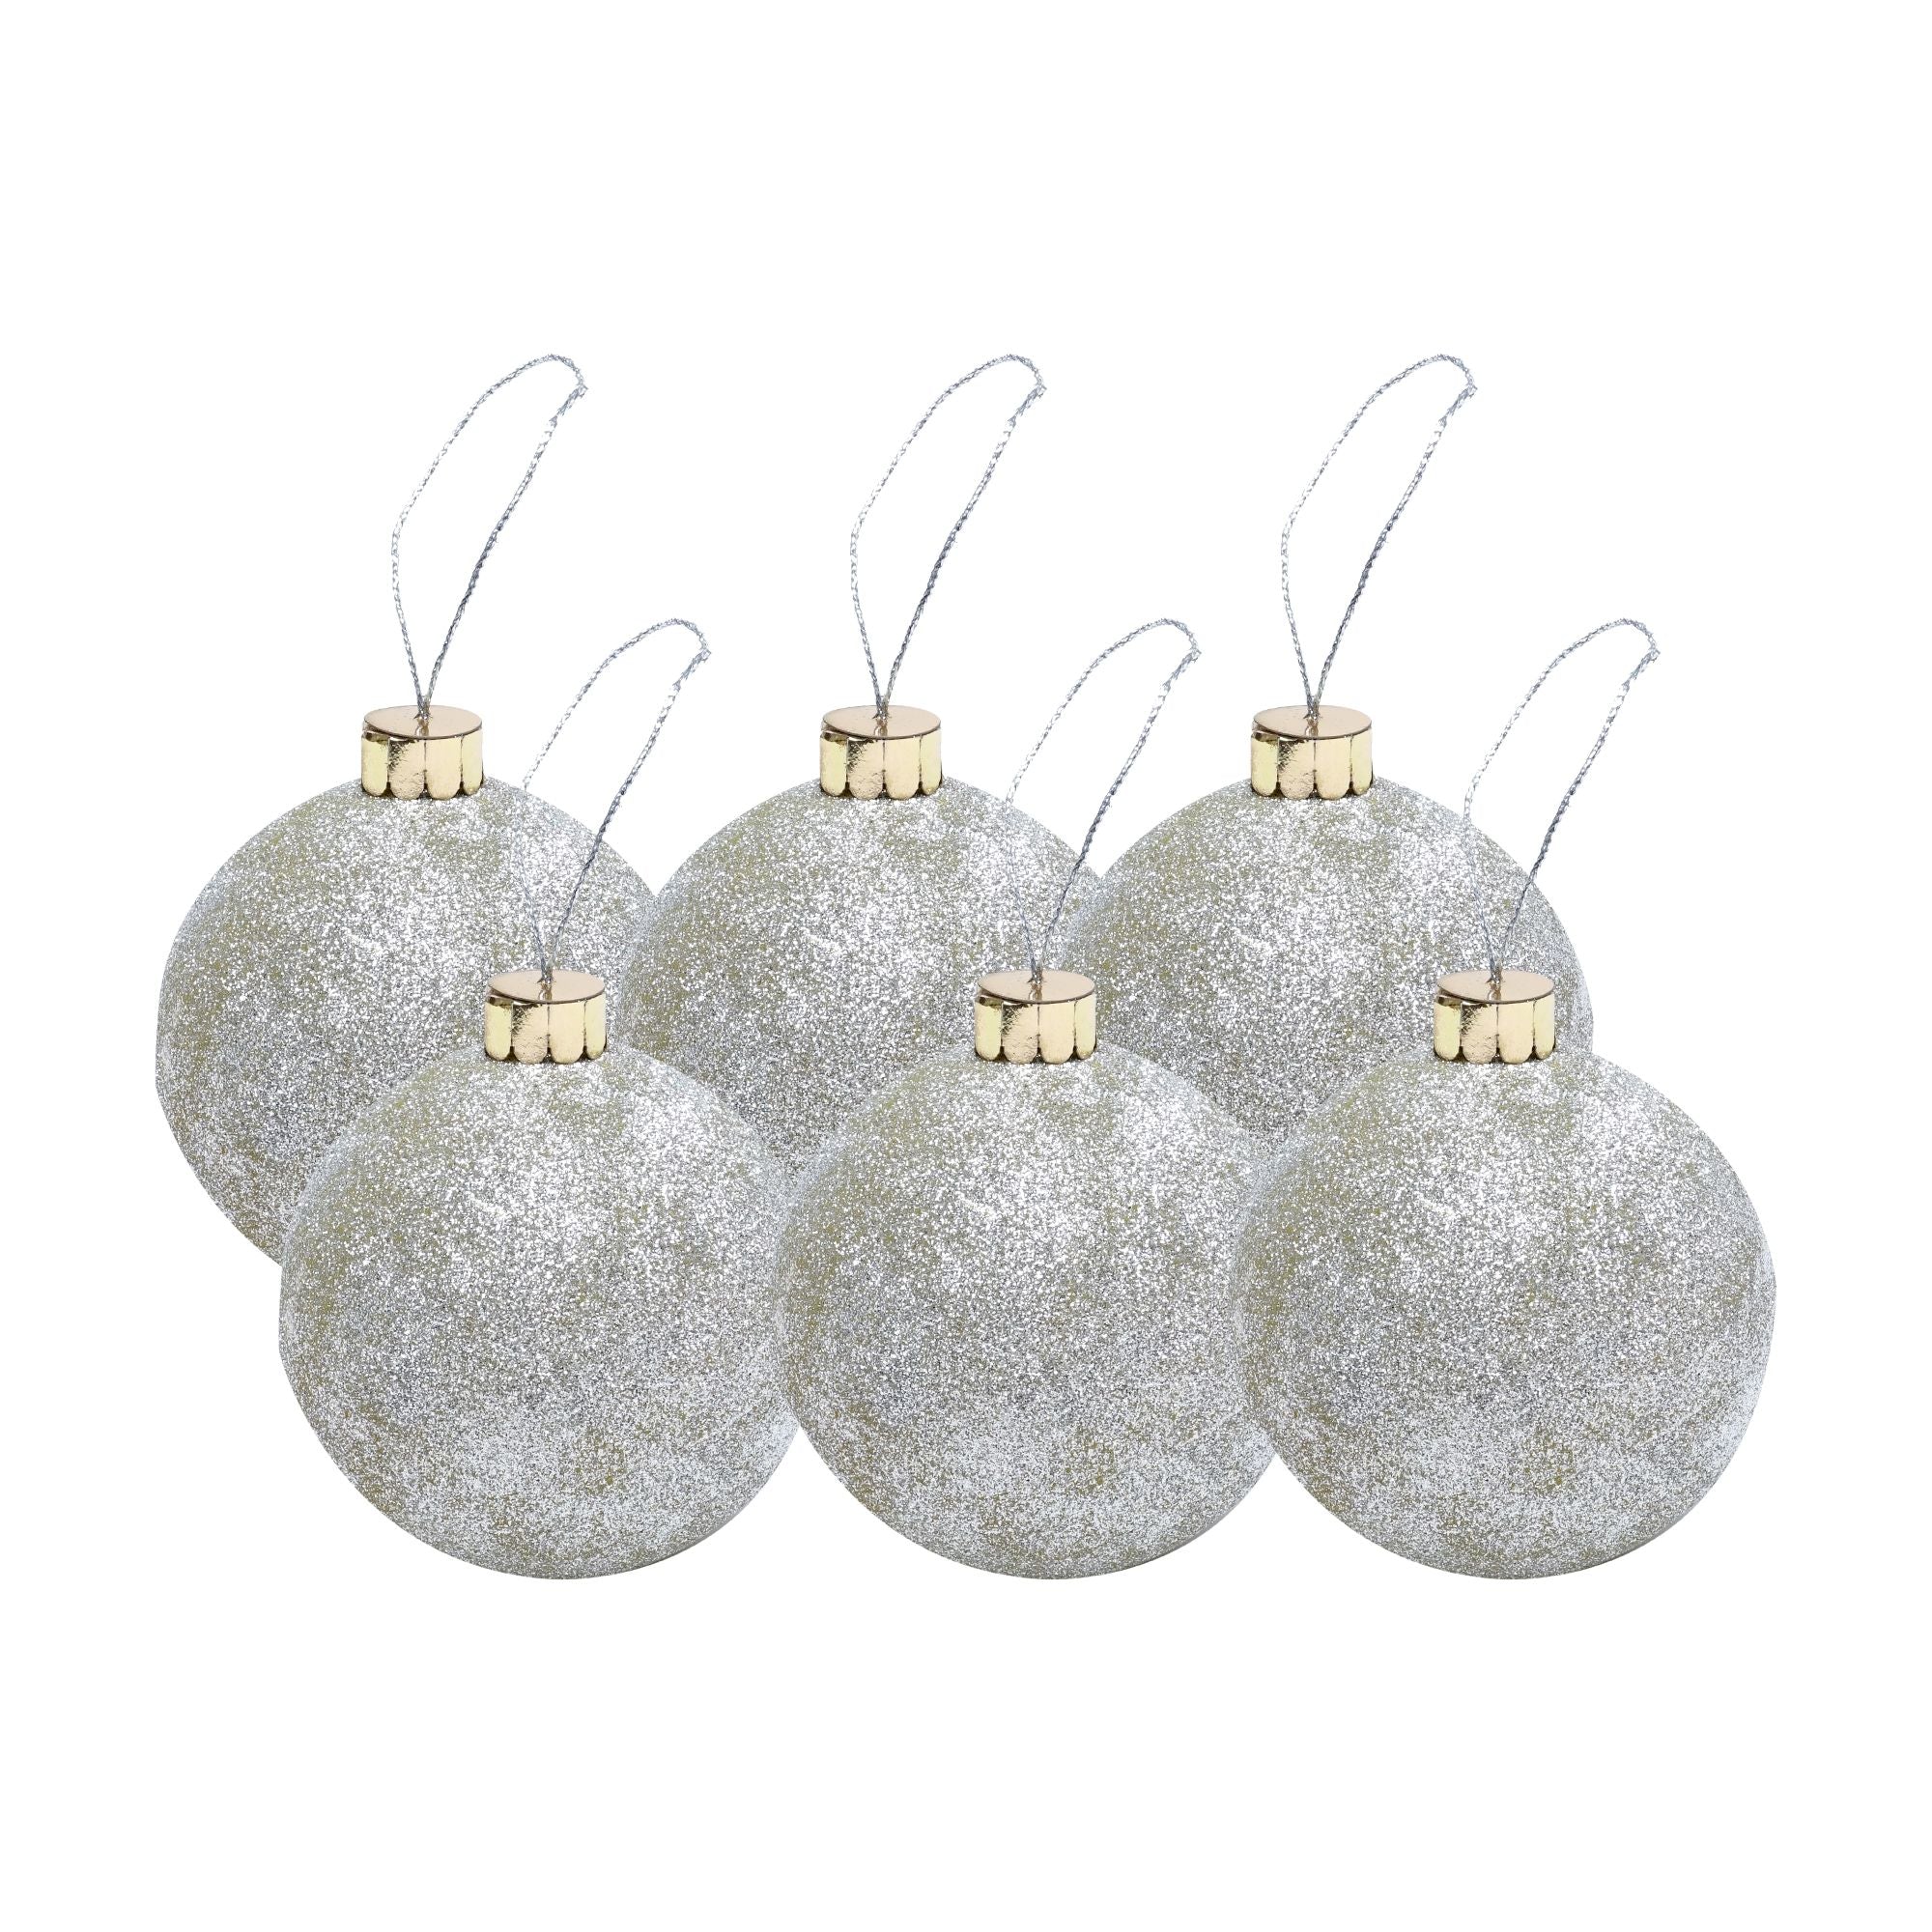 Handmade Christmas Ornaments - Glitter Baubles, 60mm, Silver, 6pc